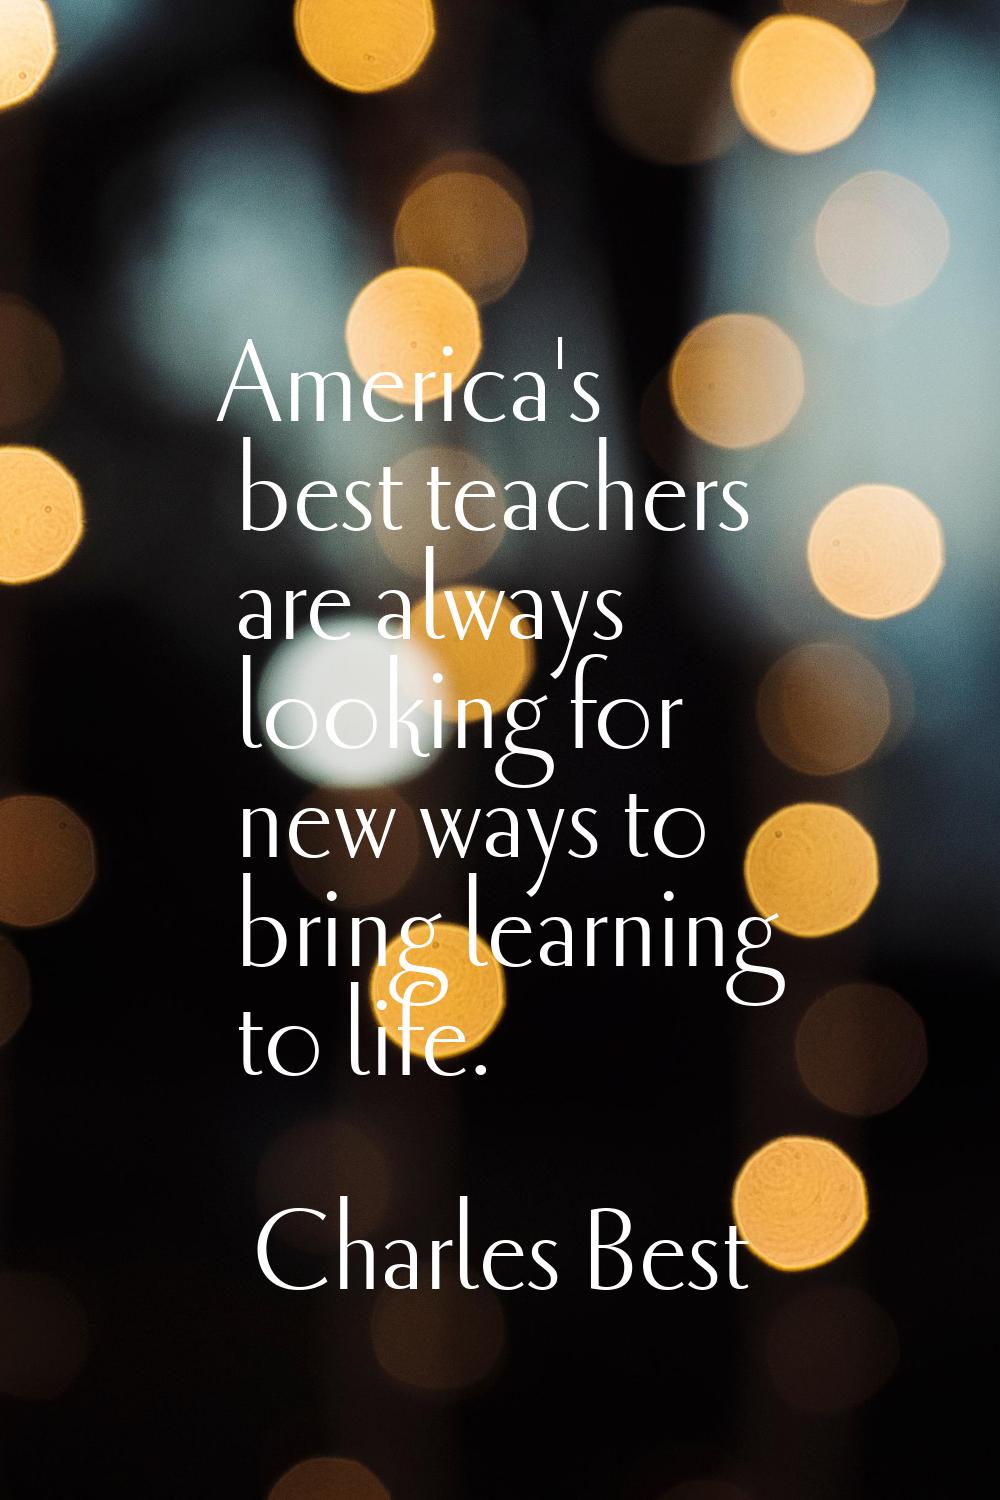 America's best teachers are always looking for new ways to bring learning to life.